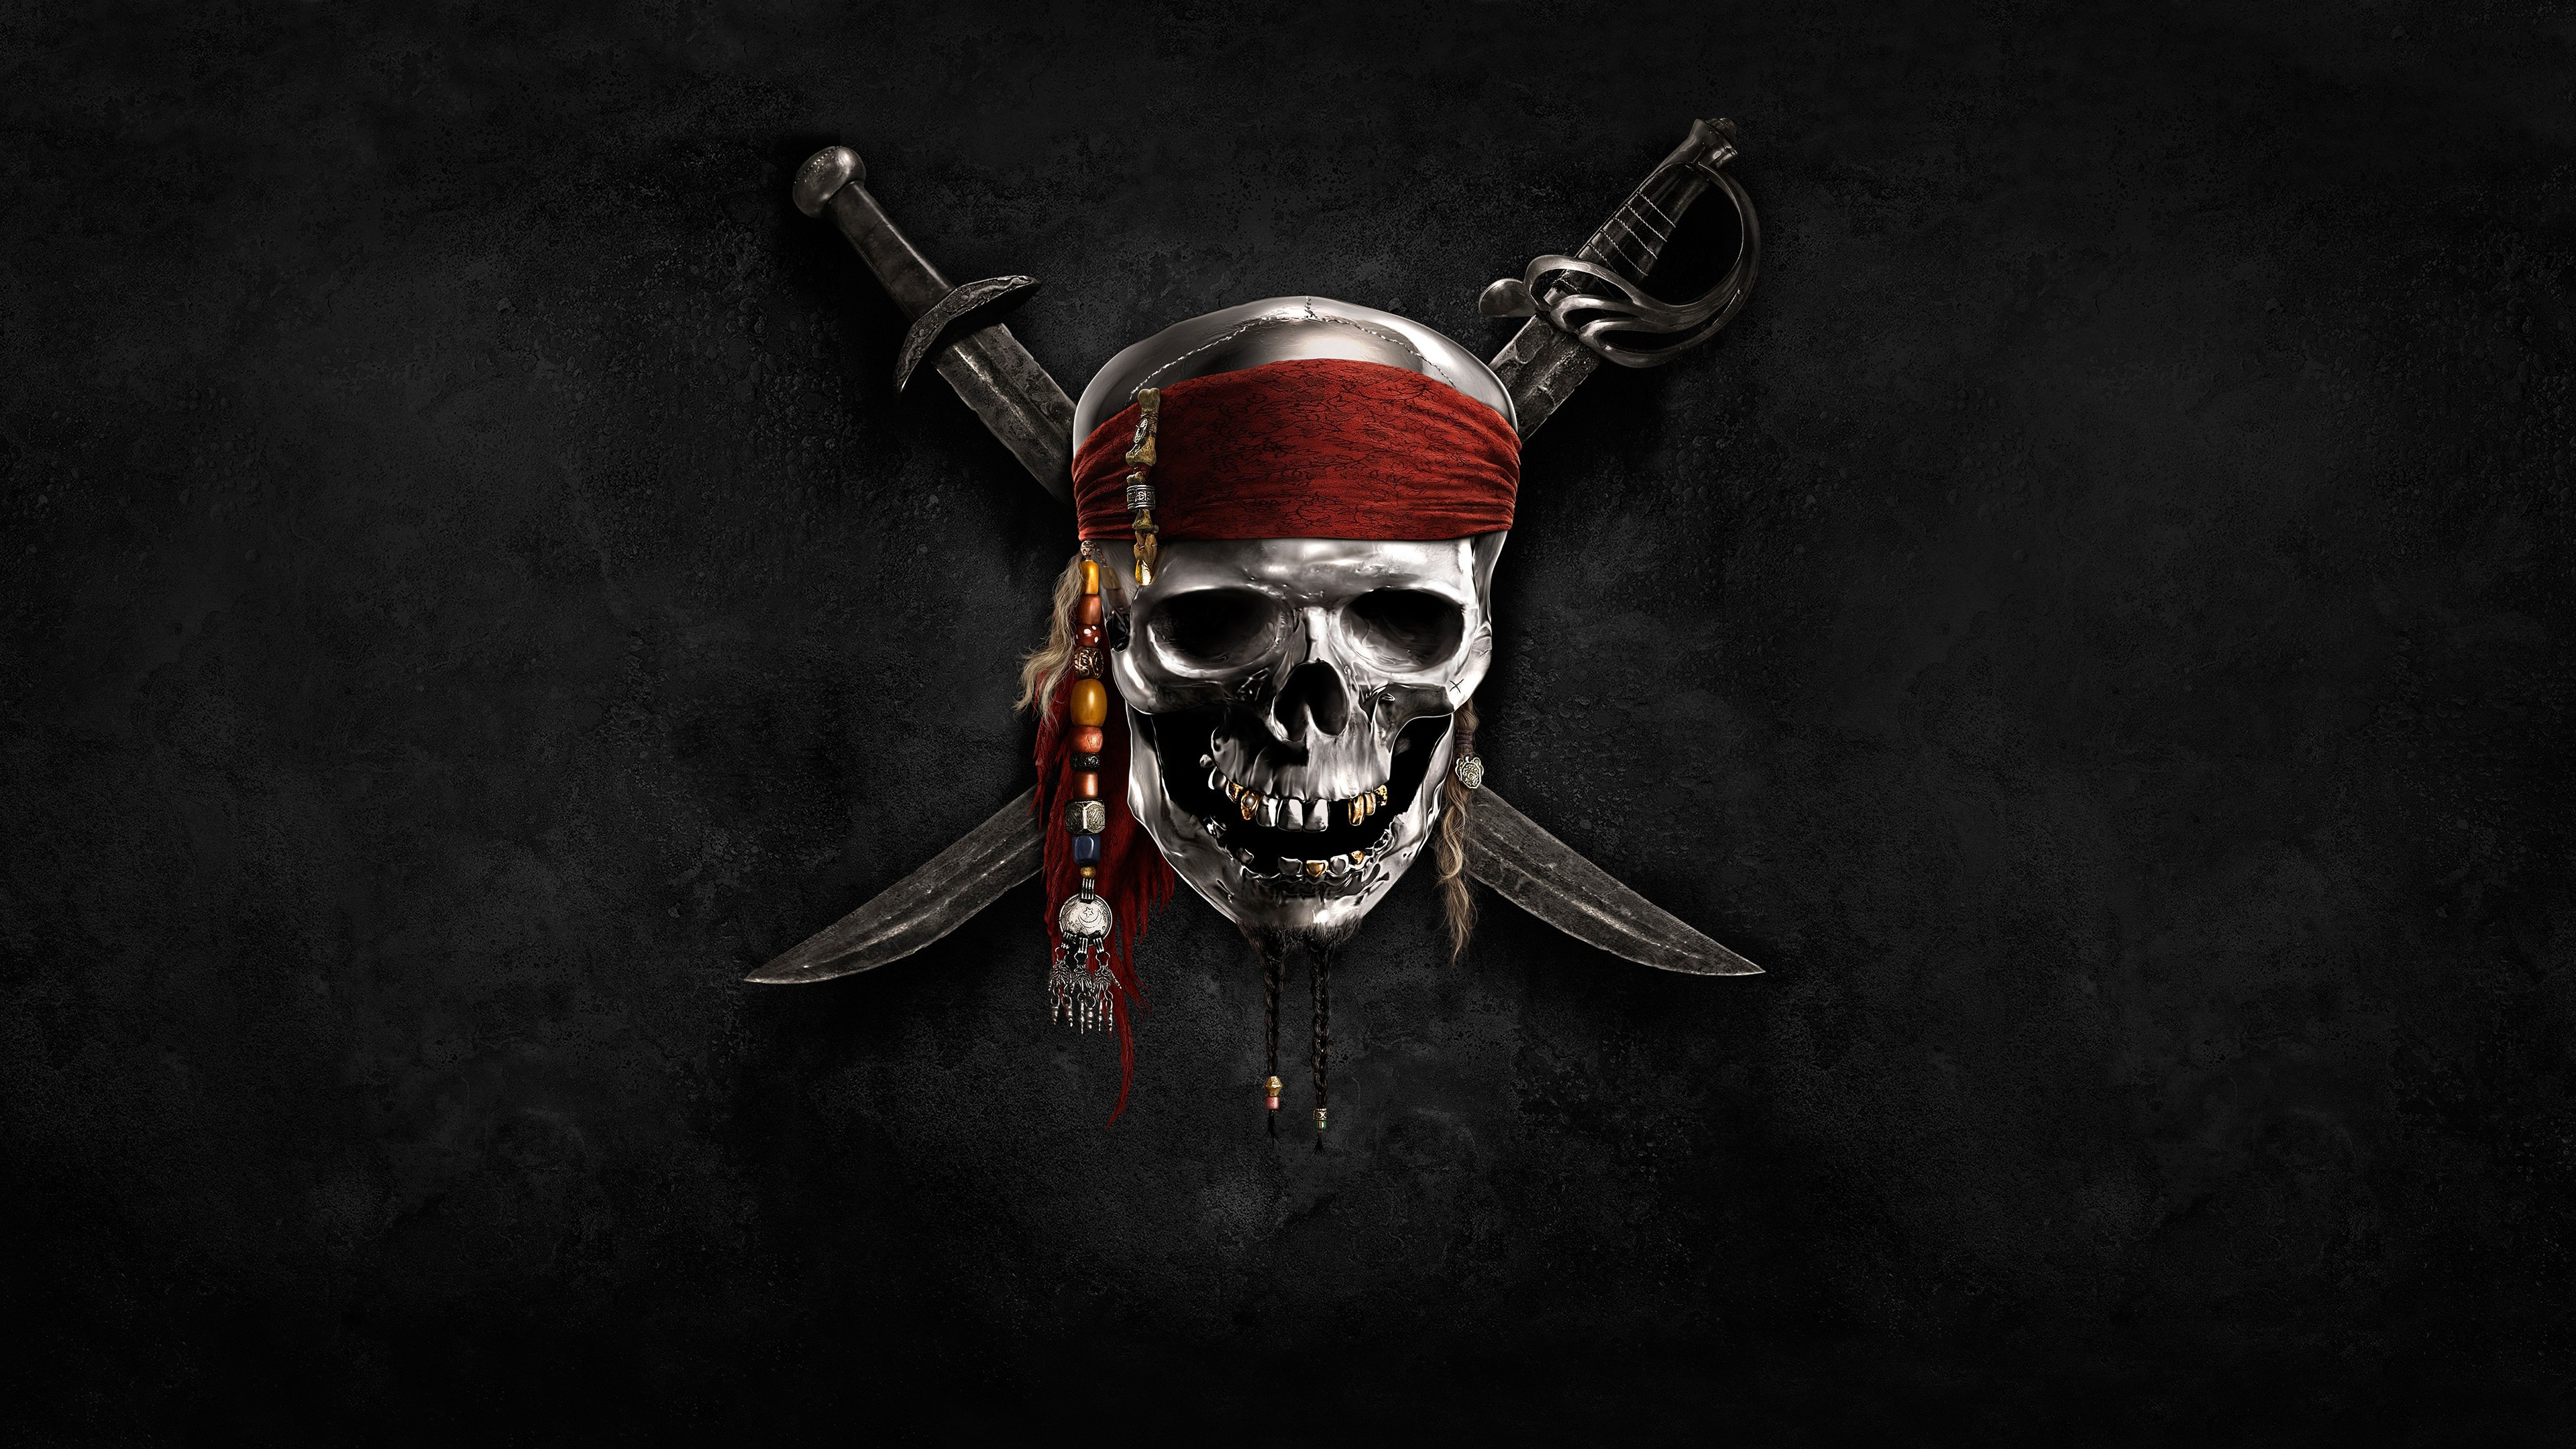 3840x2160 Pirate Wallpaper for Walls Magnificent Pirate 4k Hd Artist 4k Wallpapers  Backgrounds